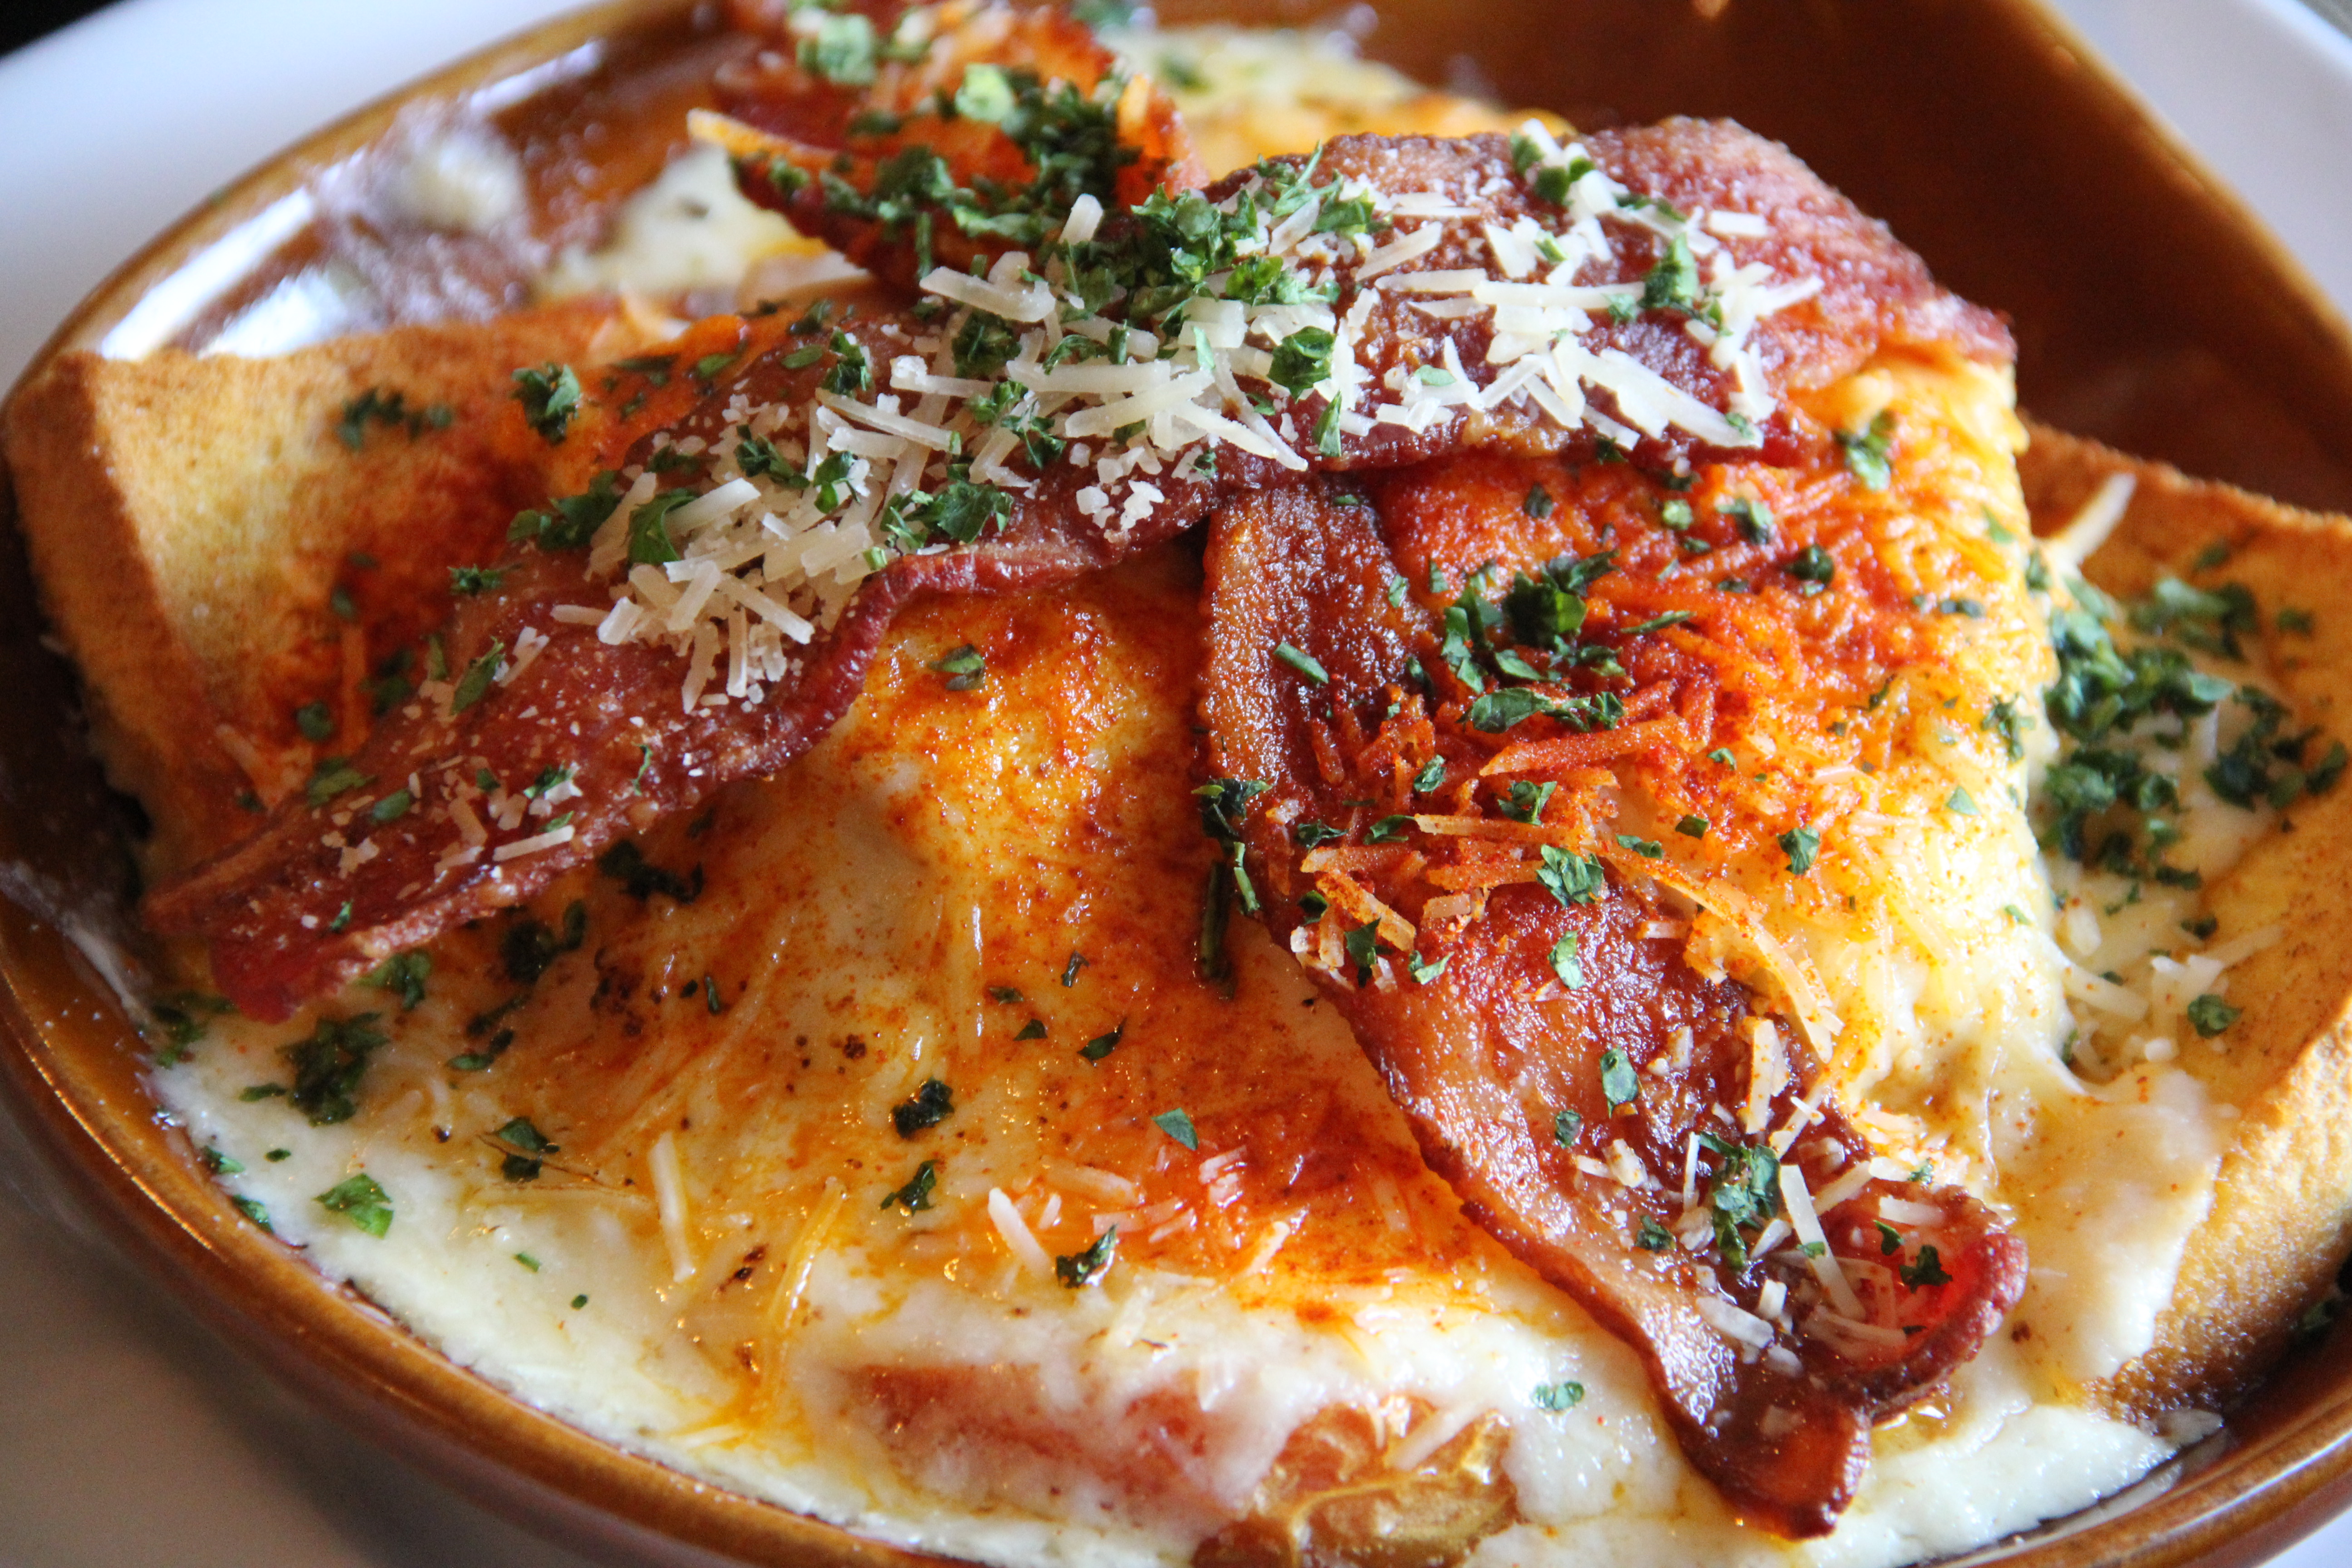 Louisville's famous Hot Brown from Brown Hotel